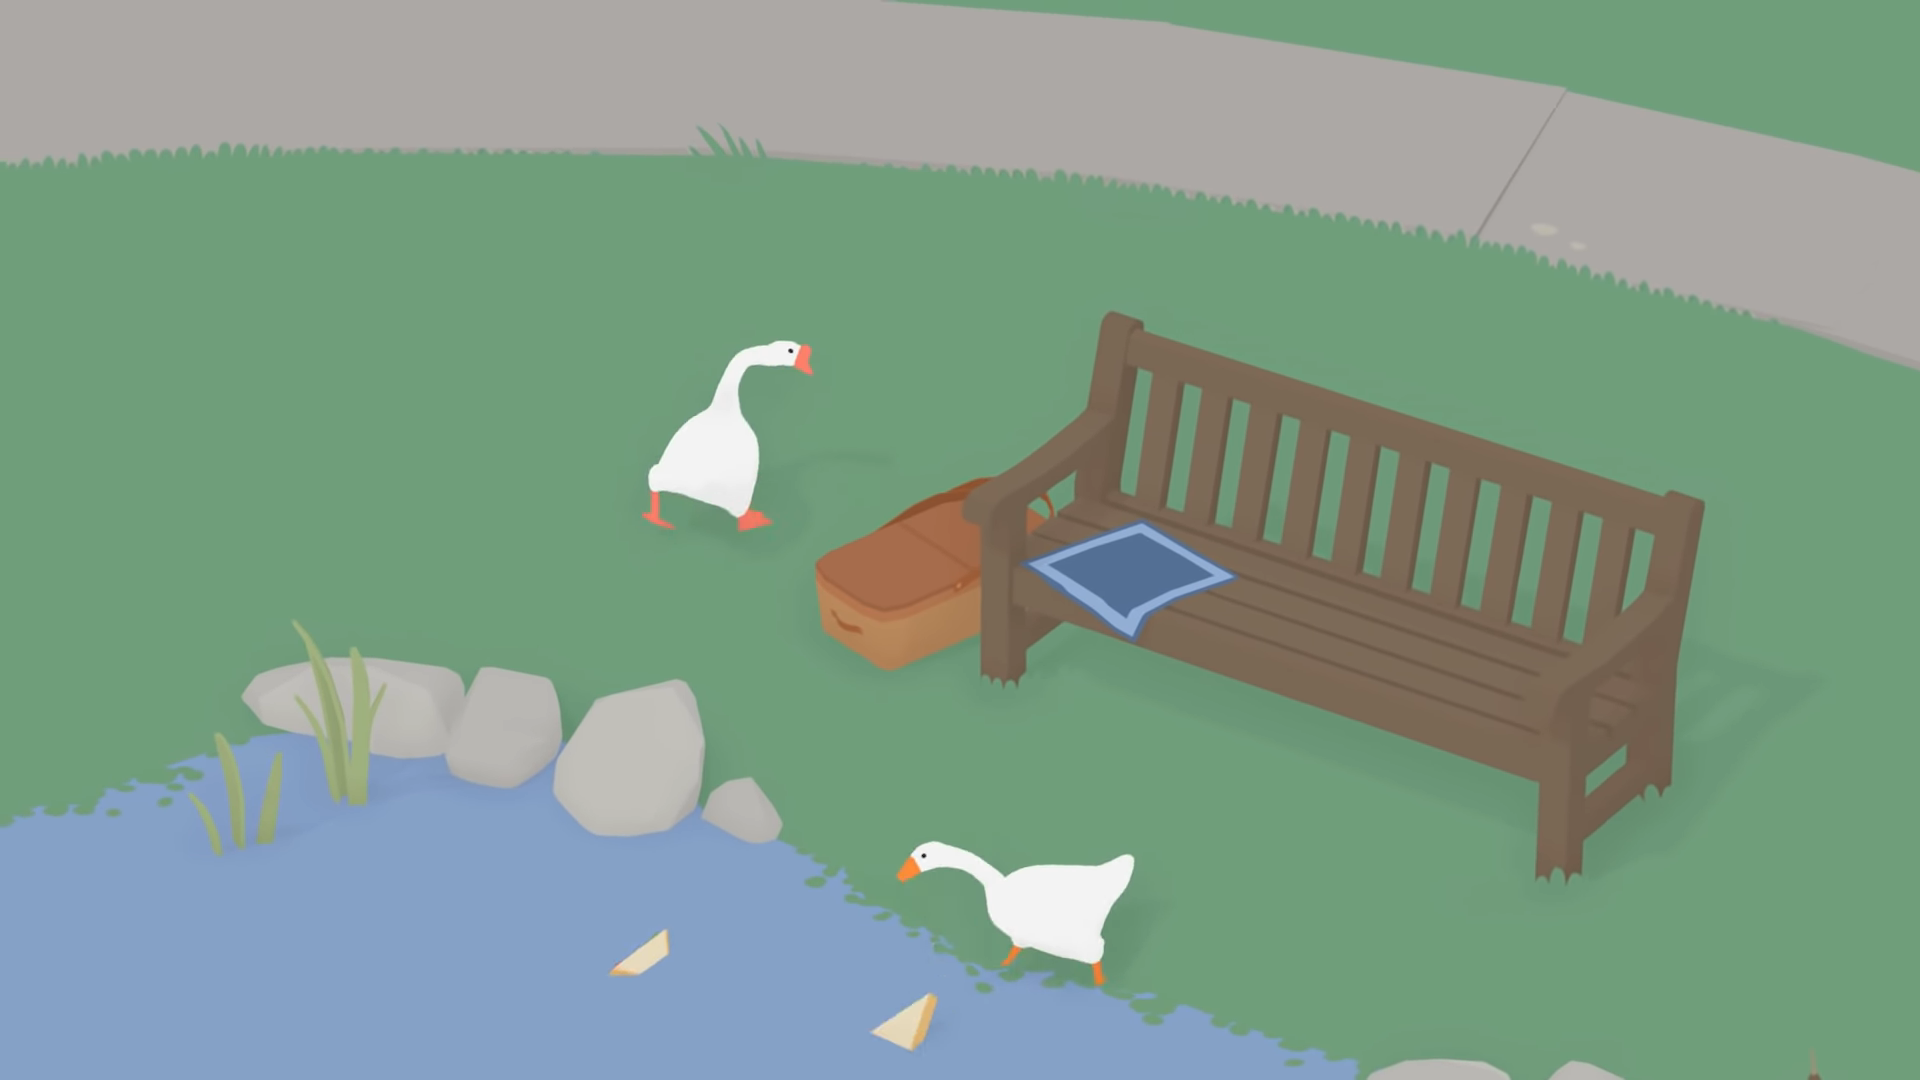 untitled goose game two player